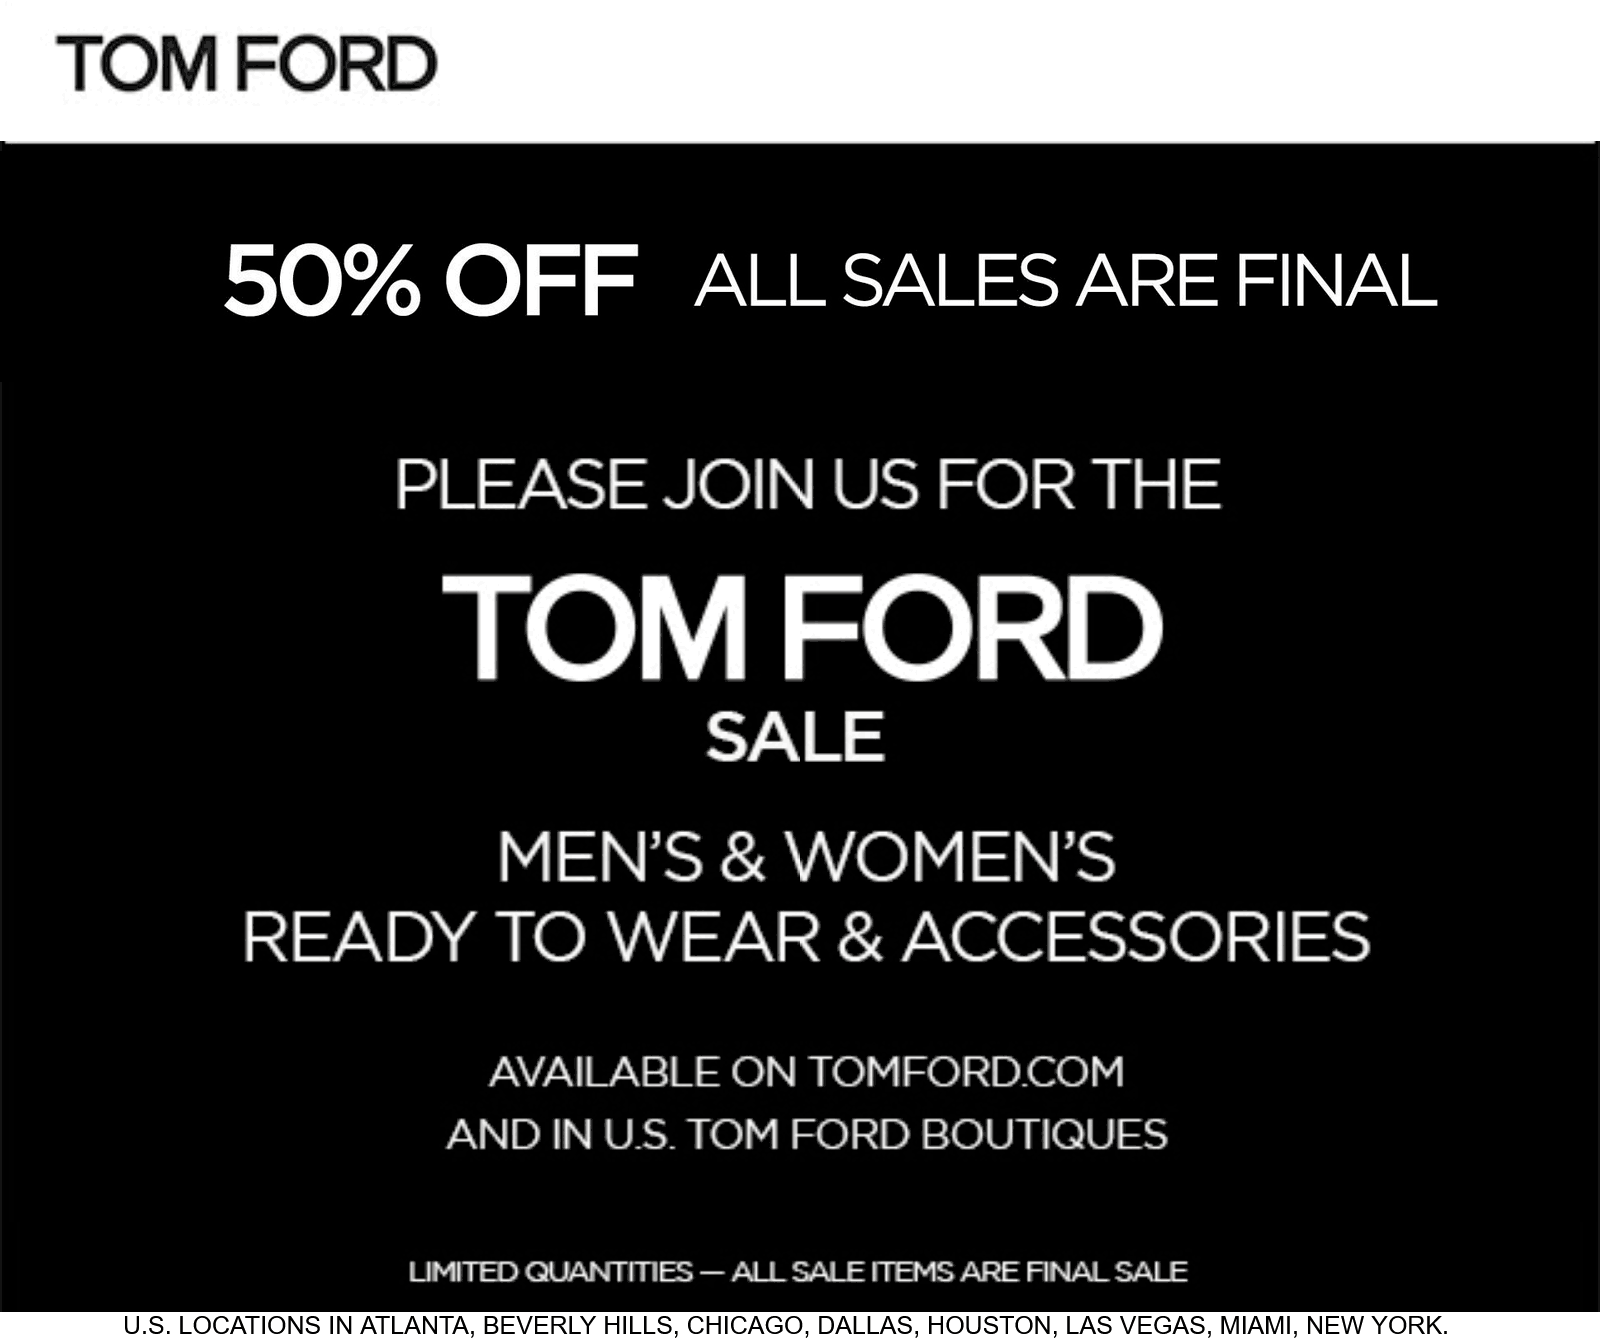 Tom Ford stores Coupon  Extra 50% off sale items at Tom Ford, ditto online #tomford 